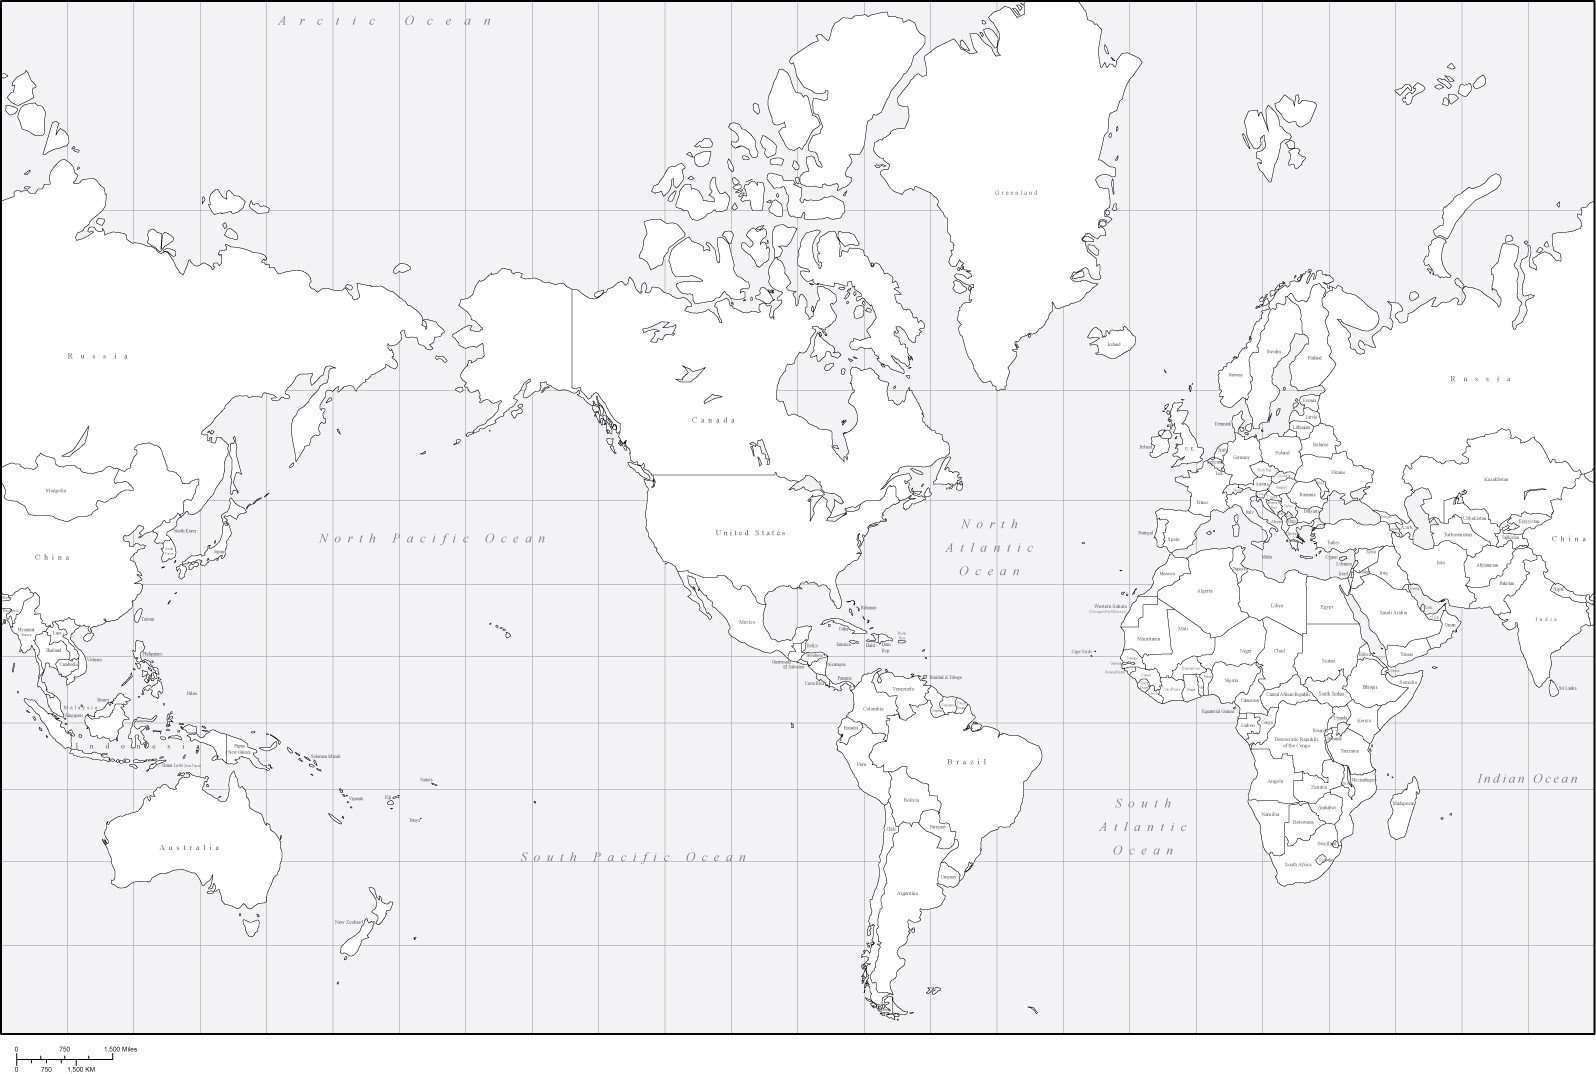 world map black and white continents and oceans